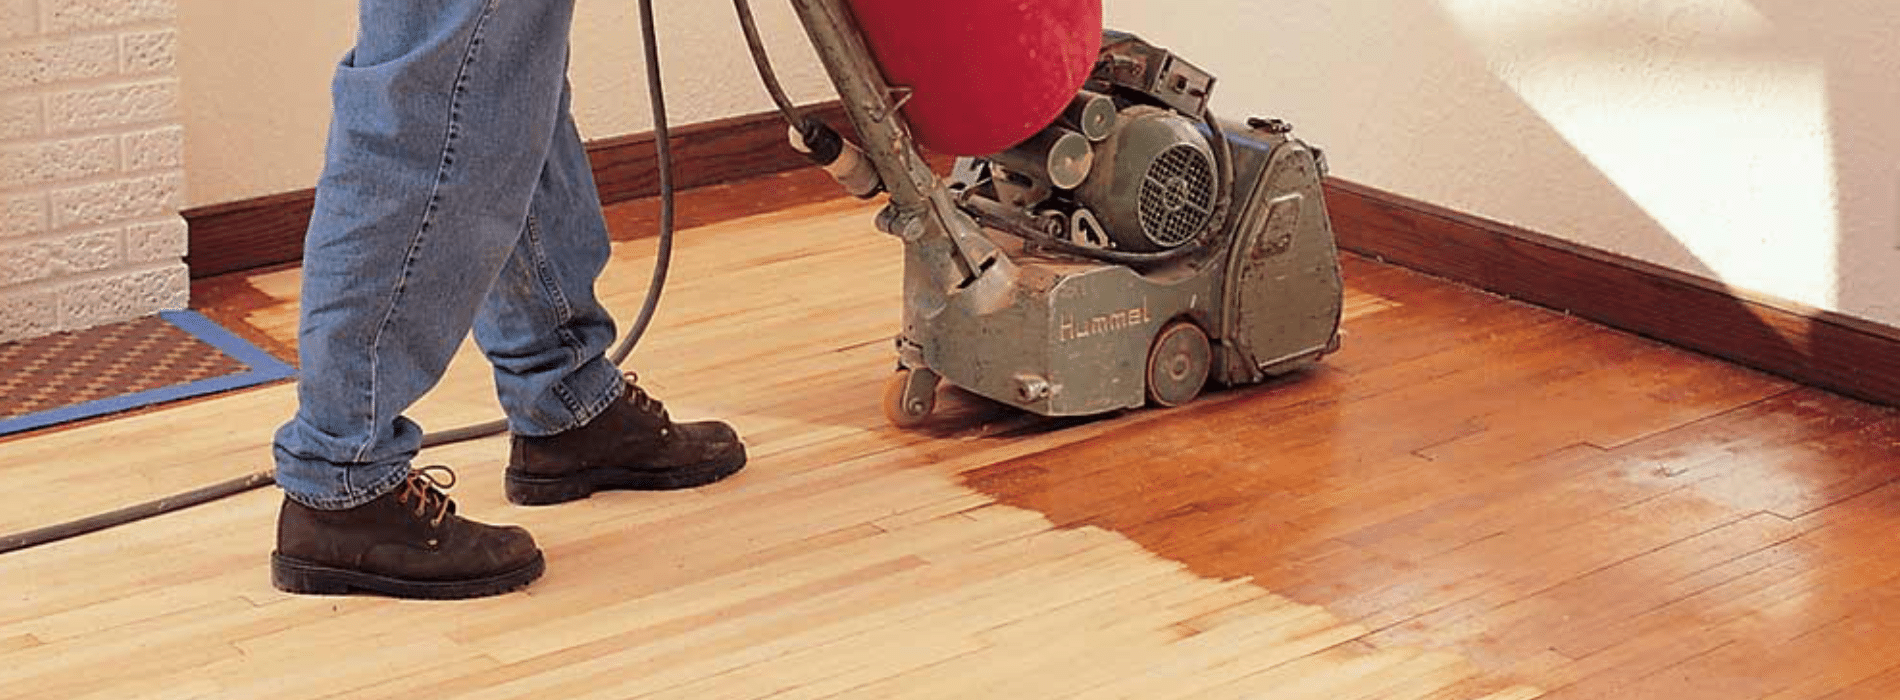 Mr Sander® are using a Bona Scorpion drum sander, measuring 200 mm, with a power output of 1.5 kW. It operates at 240 V and 50 Hz frequency in West Norwood, SE27. A dust extraction system with a HEPA filter ensures a clean and efficient sanding process for the herringbone floor. 